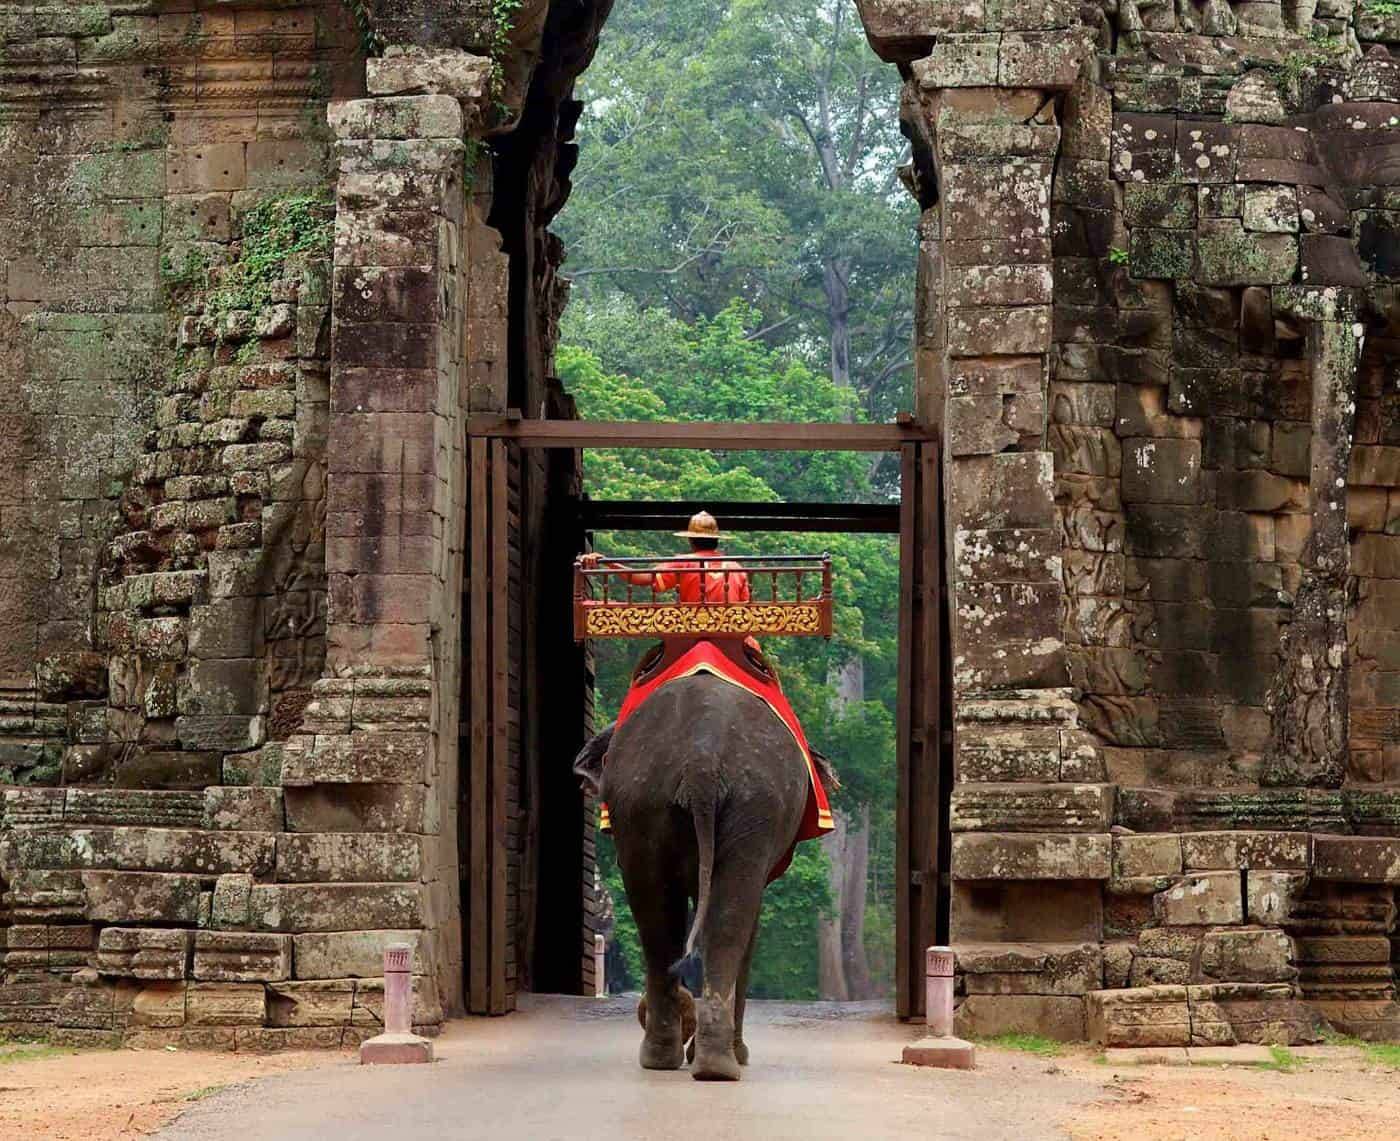 EXPLORE THE LOST TEMPLES OF ANGKOR